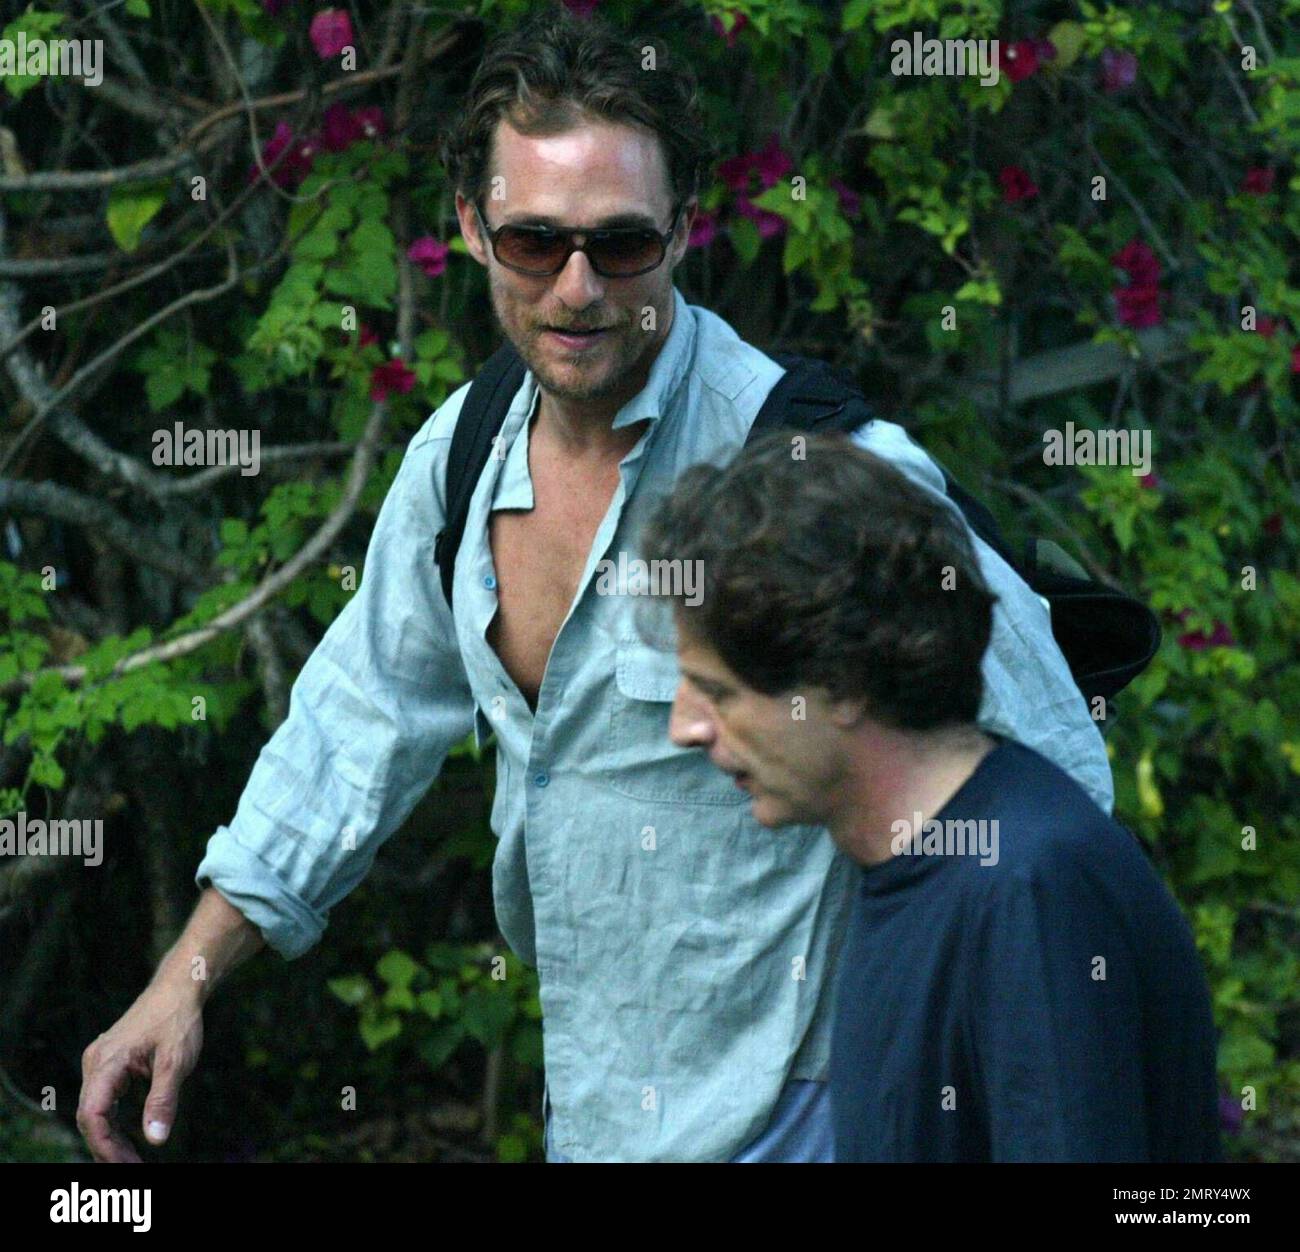 Exclusive!! Matthew McConaughey enjoys the Florida heat poolside with a friend. The Sahara star had just flown in from Canada. Miami Beach, 3/31/05 Stock Photo